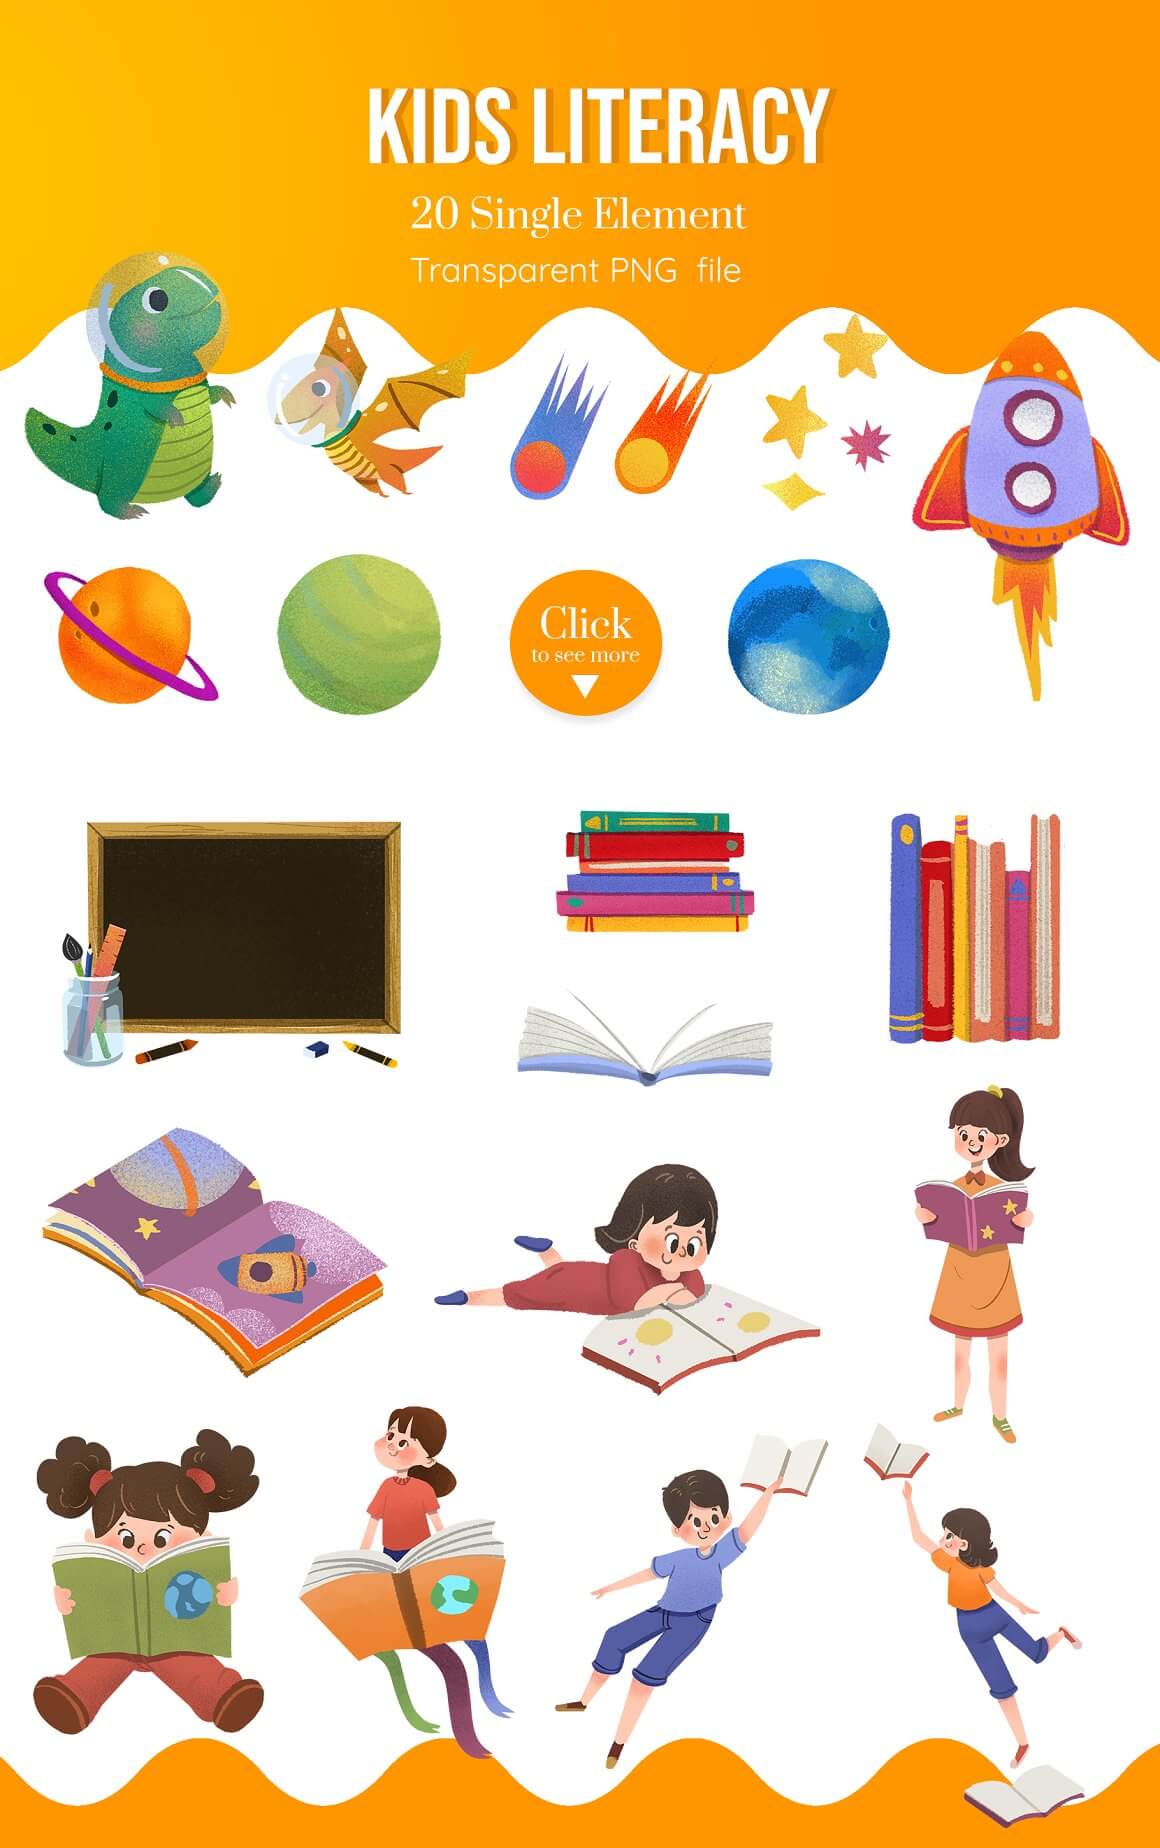 20 Single Element of Kids Literacy: books, toys and other.